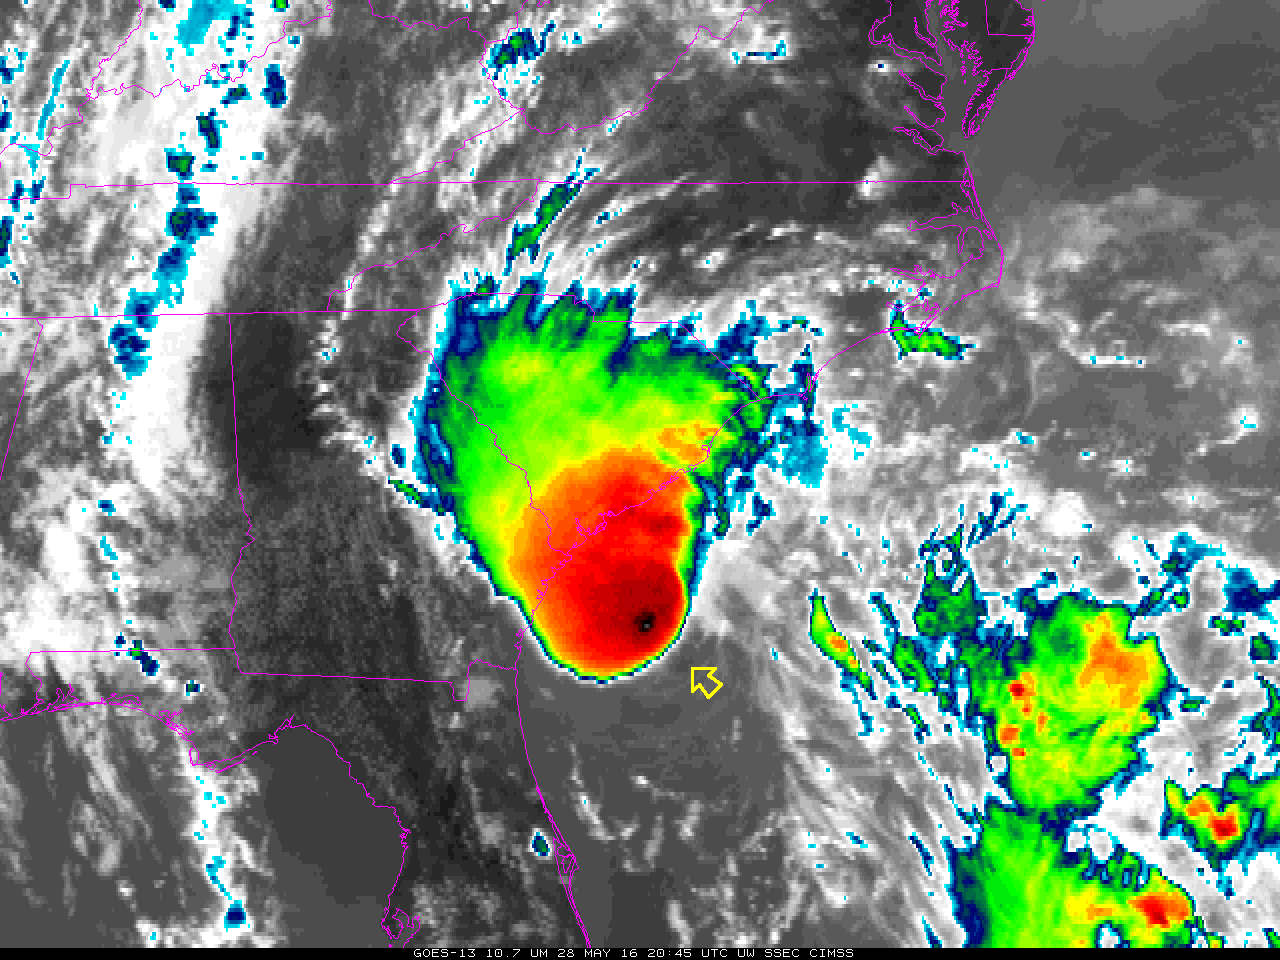 GOES-13 Infrared (10.7 µm) Imagery at 2045 UTC on 28 May and at 1045 UTC 29 May 2016; the Yellow Arrow points to the low-level circulation center [click to enlarge]